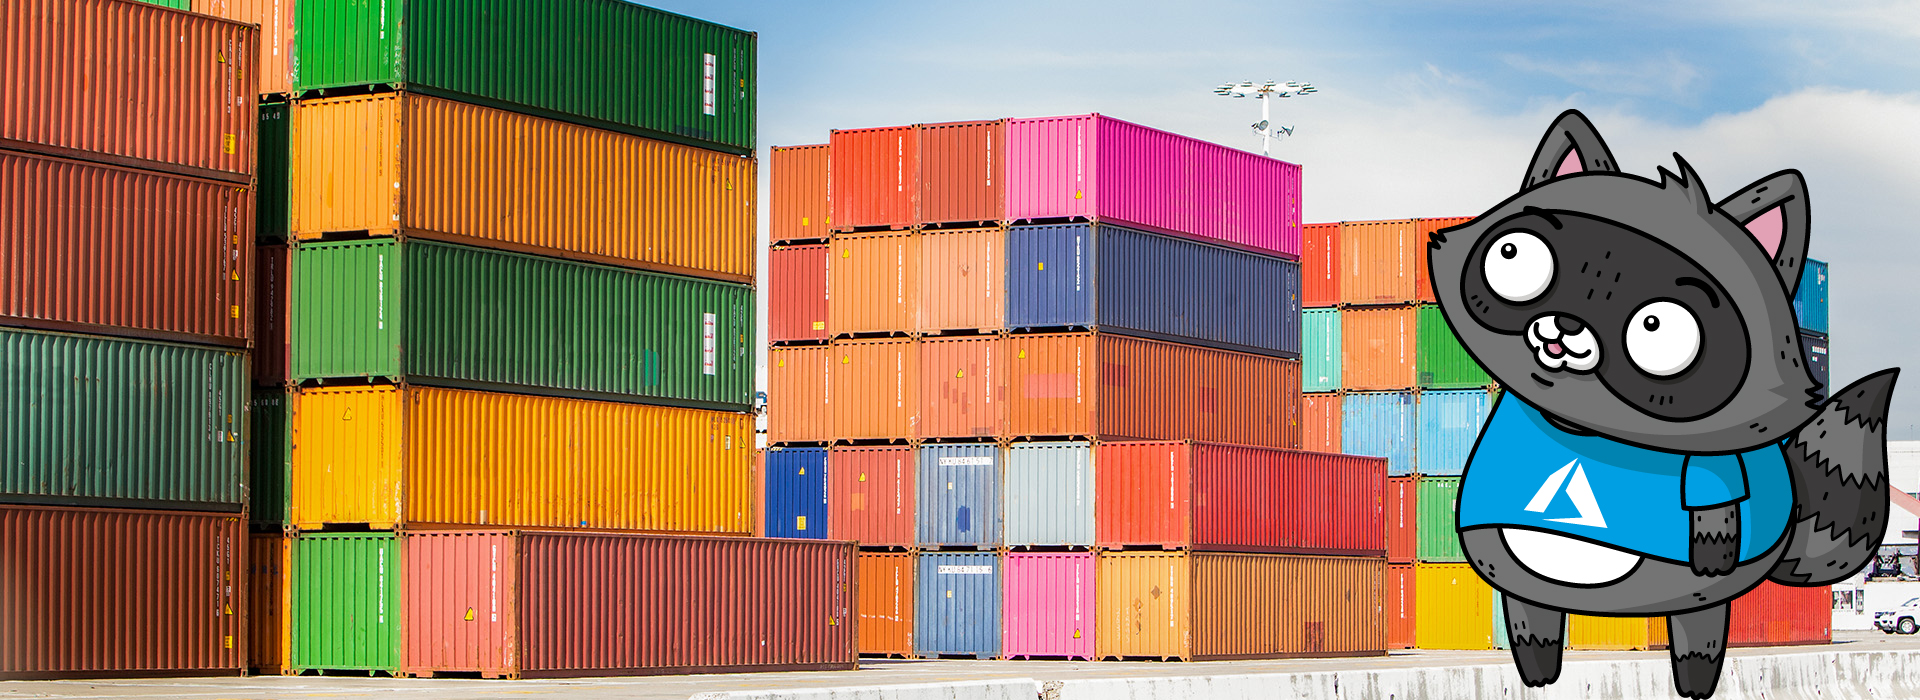 A photo of colourful shipping containers, next to a drawing of Bit the Raccoon.